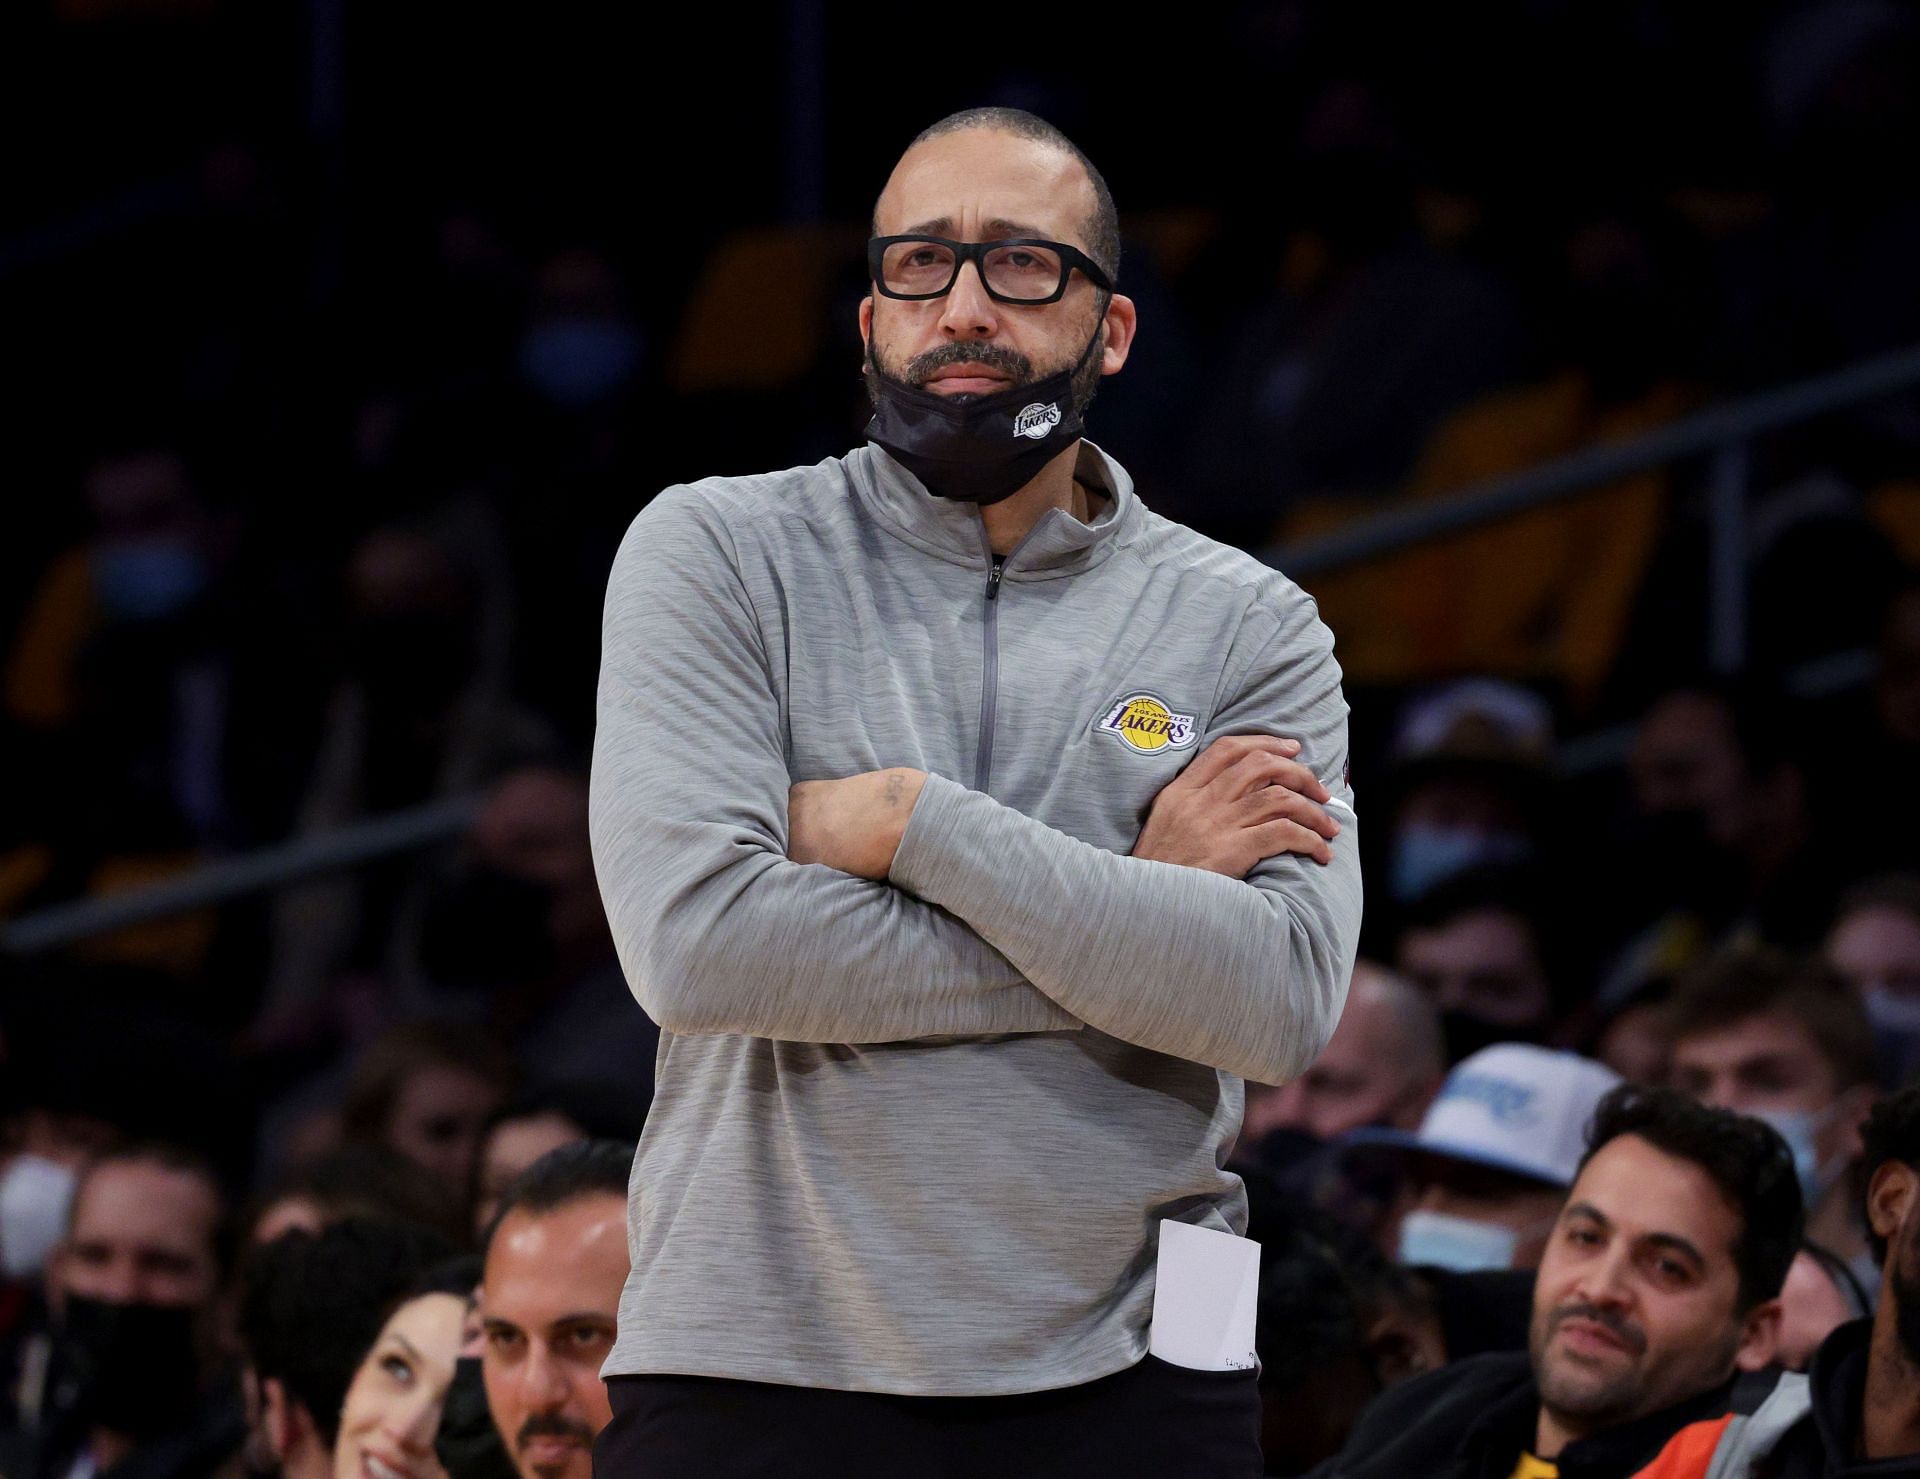 David Fizdale will not be a part of the LA Lakers moving forward.